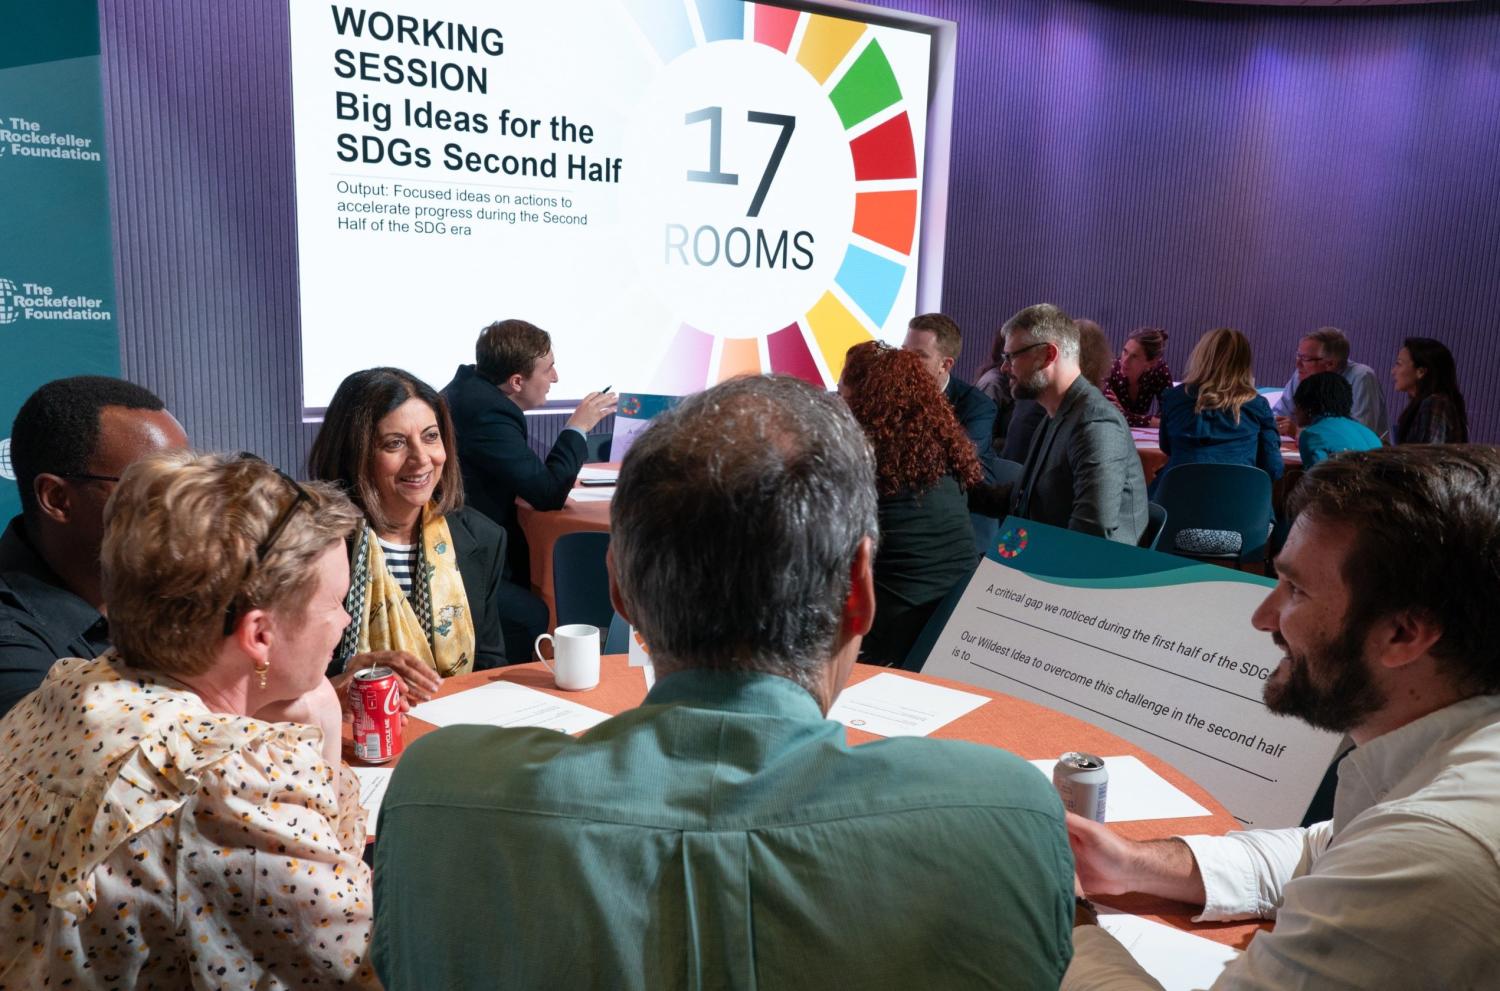 Participants discuss big ideas for the SDGs second half during the September 2023 17 Rooms community gathering. Featuring (from right to left): Duncan Kariuki, Allison Bellwood, Shaheen Kassim-Lakha, Roy Steiner, and Francois Souchet. Photo taken by Ralph Alswang (on behalf of The Rockefeller Foundation).